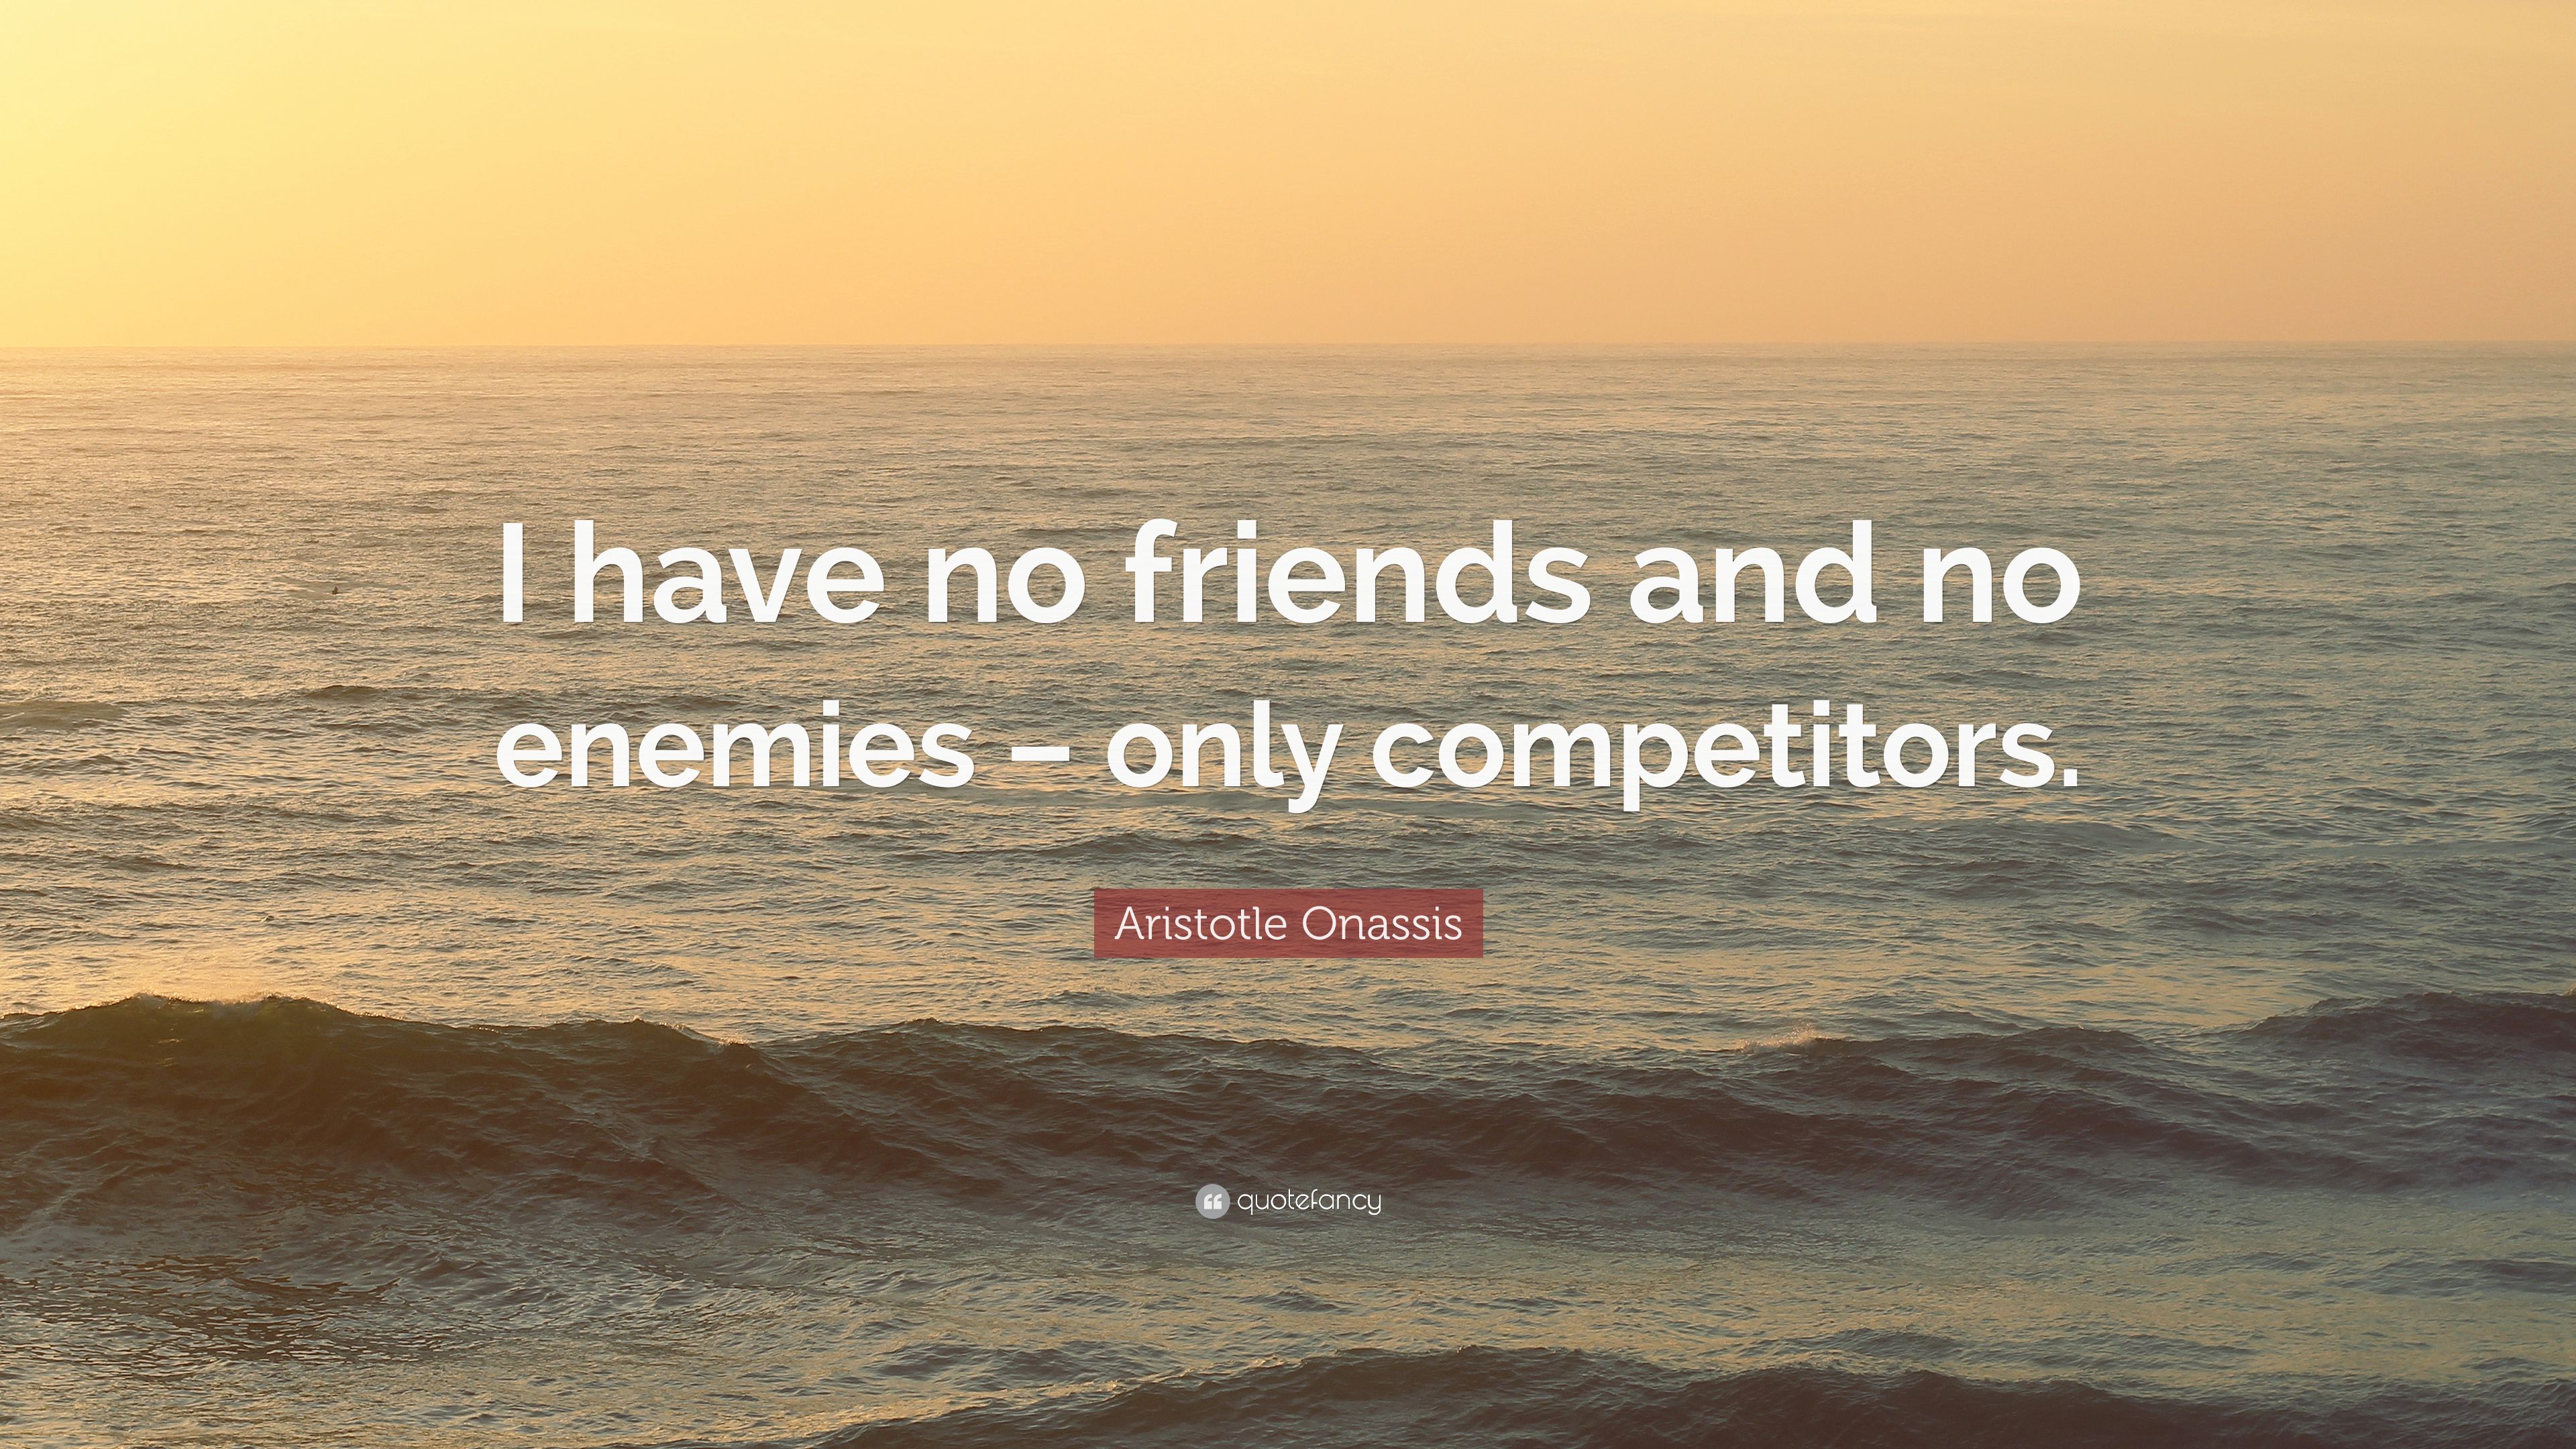 Aristotle Onassis Quote: “I have no friends and no enemies